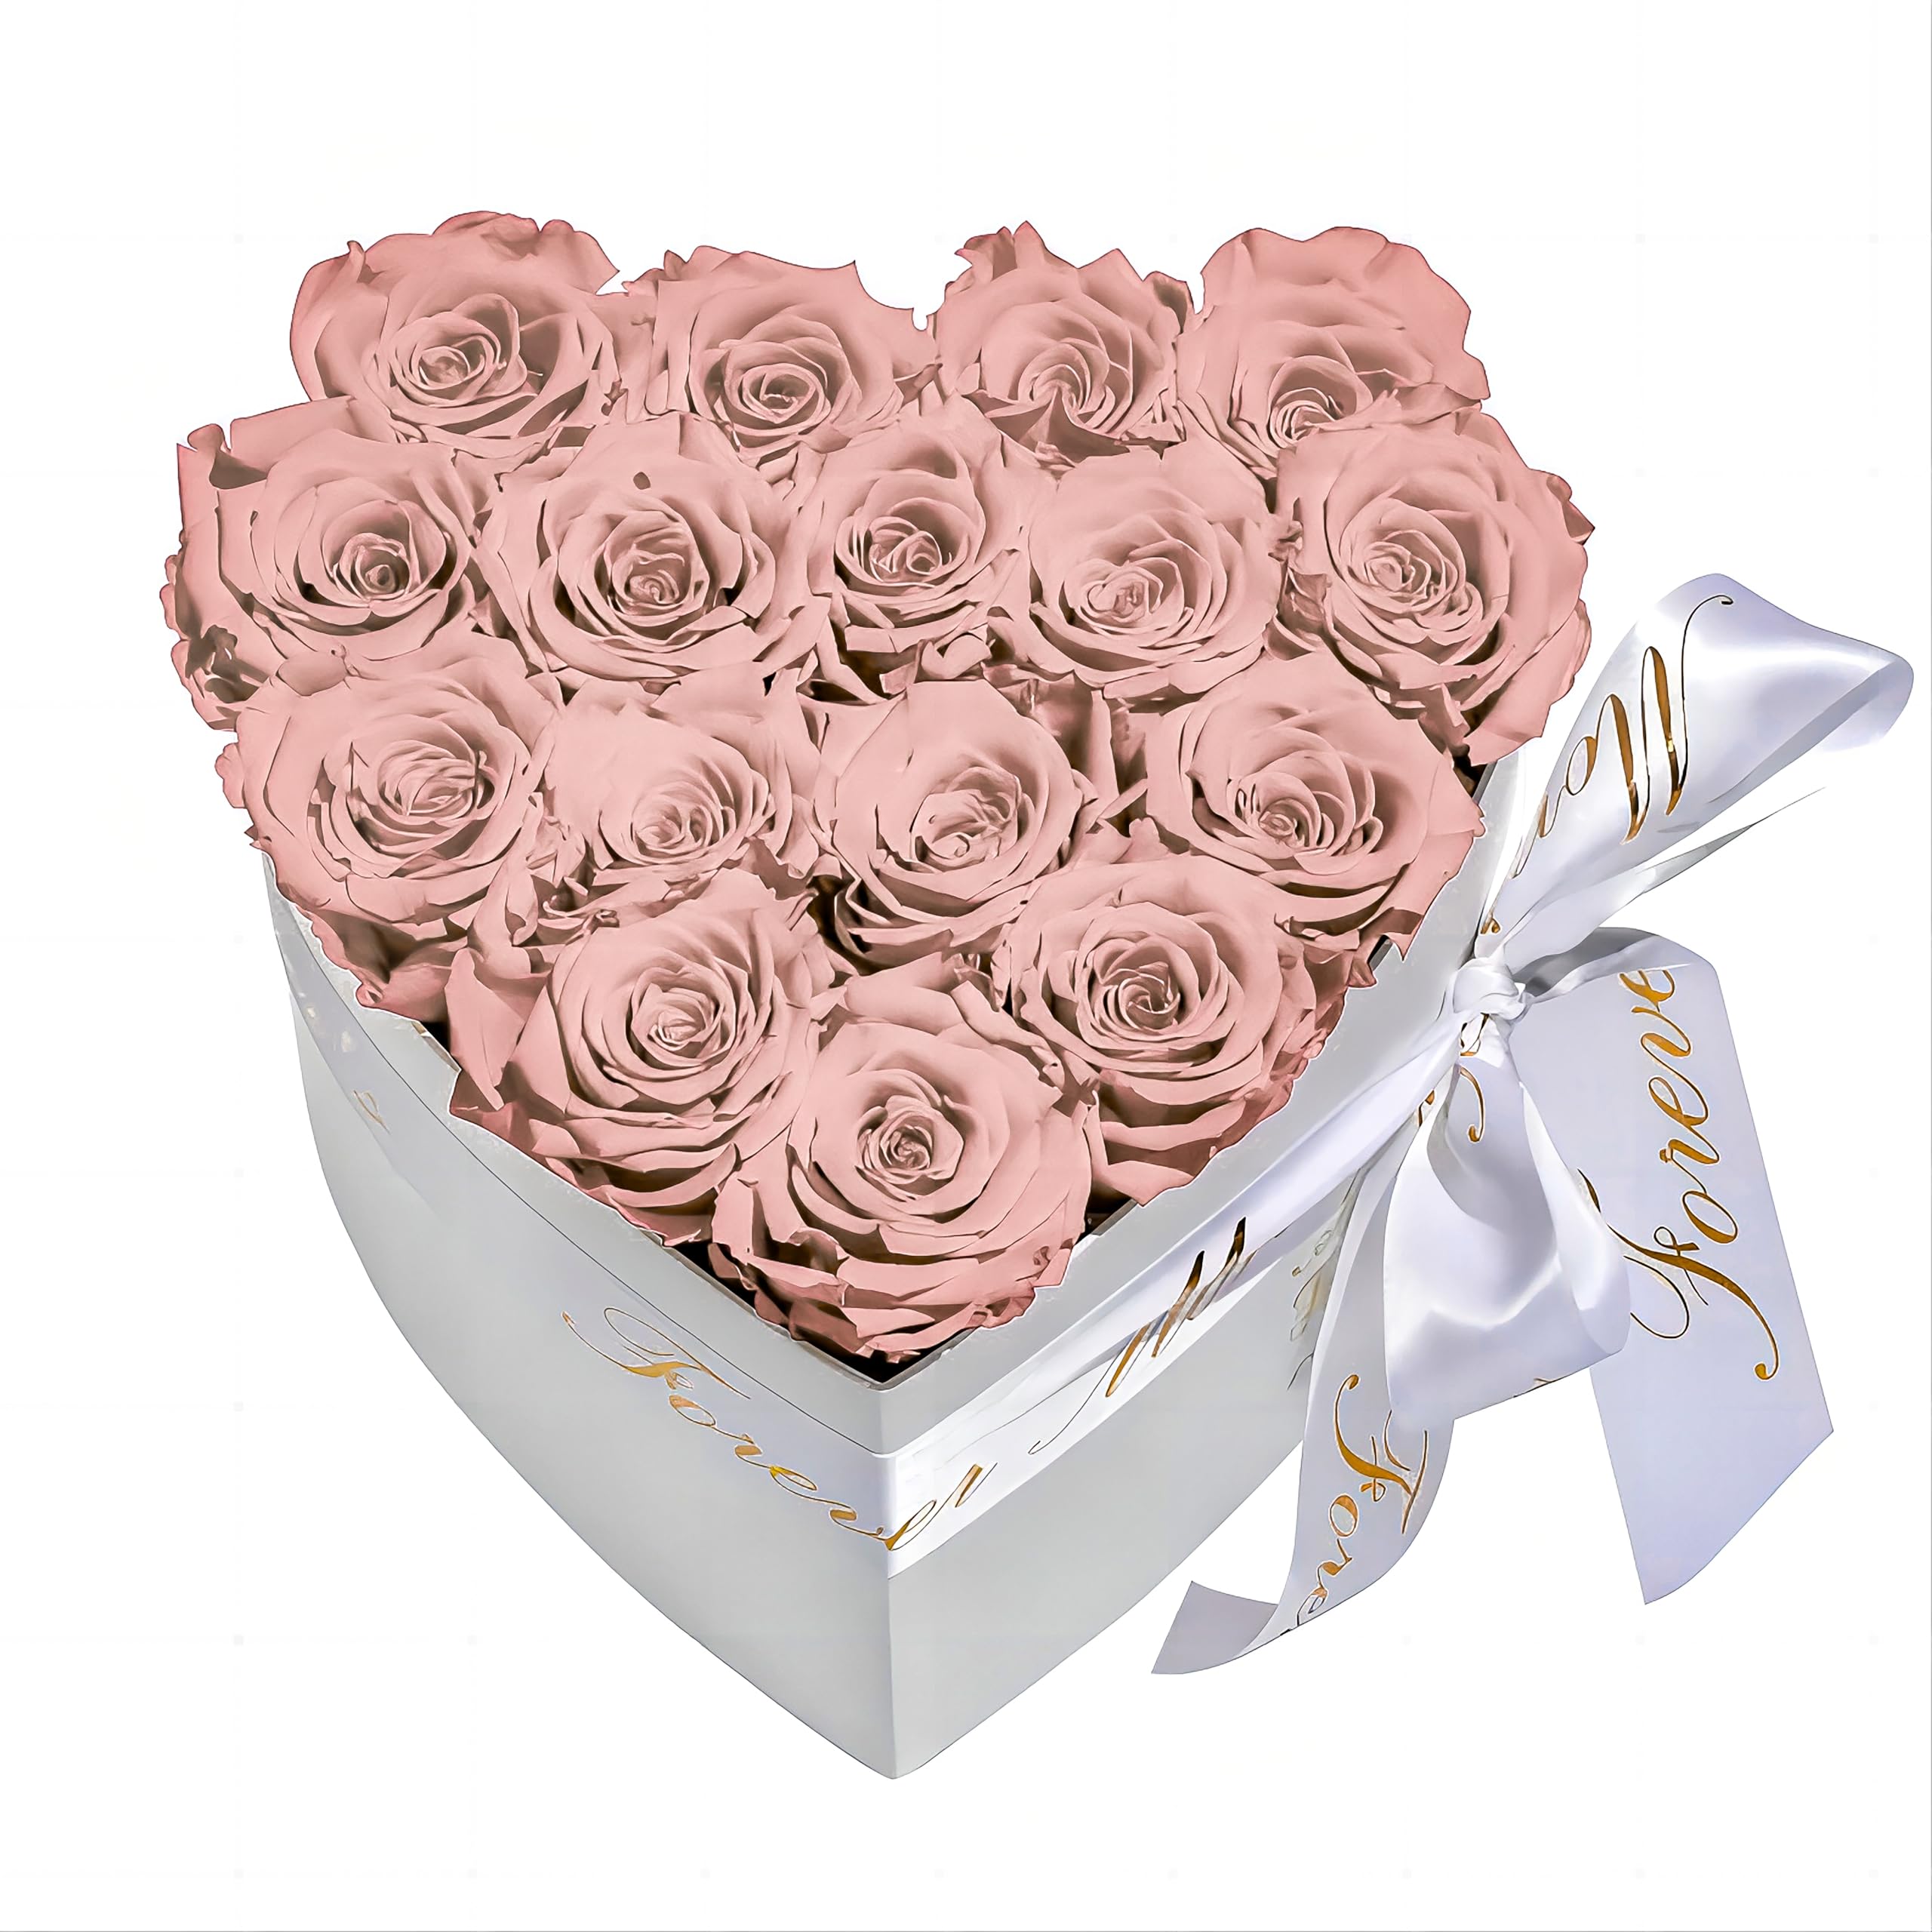 New Arrival Golden Supplier Preserved Roses Heart Roses That Last A Year Long Lasting Rose Preserved in Flower Box